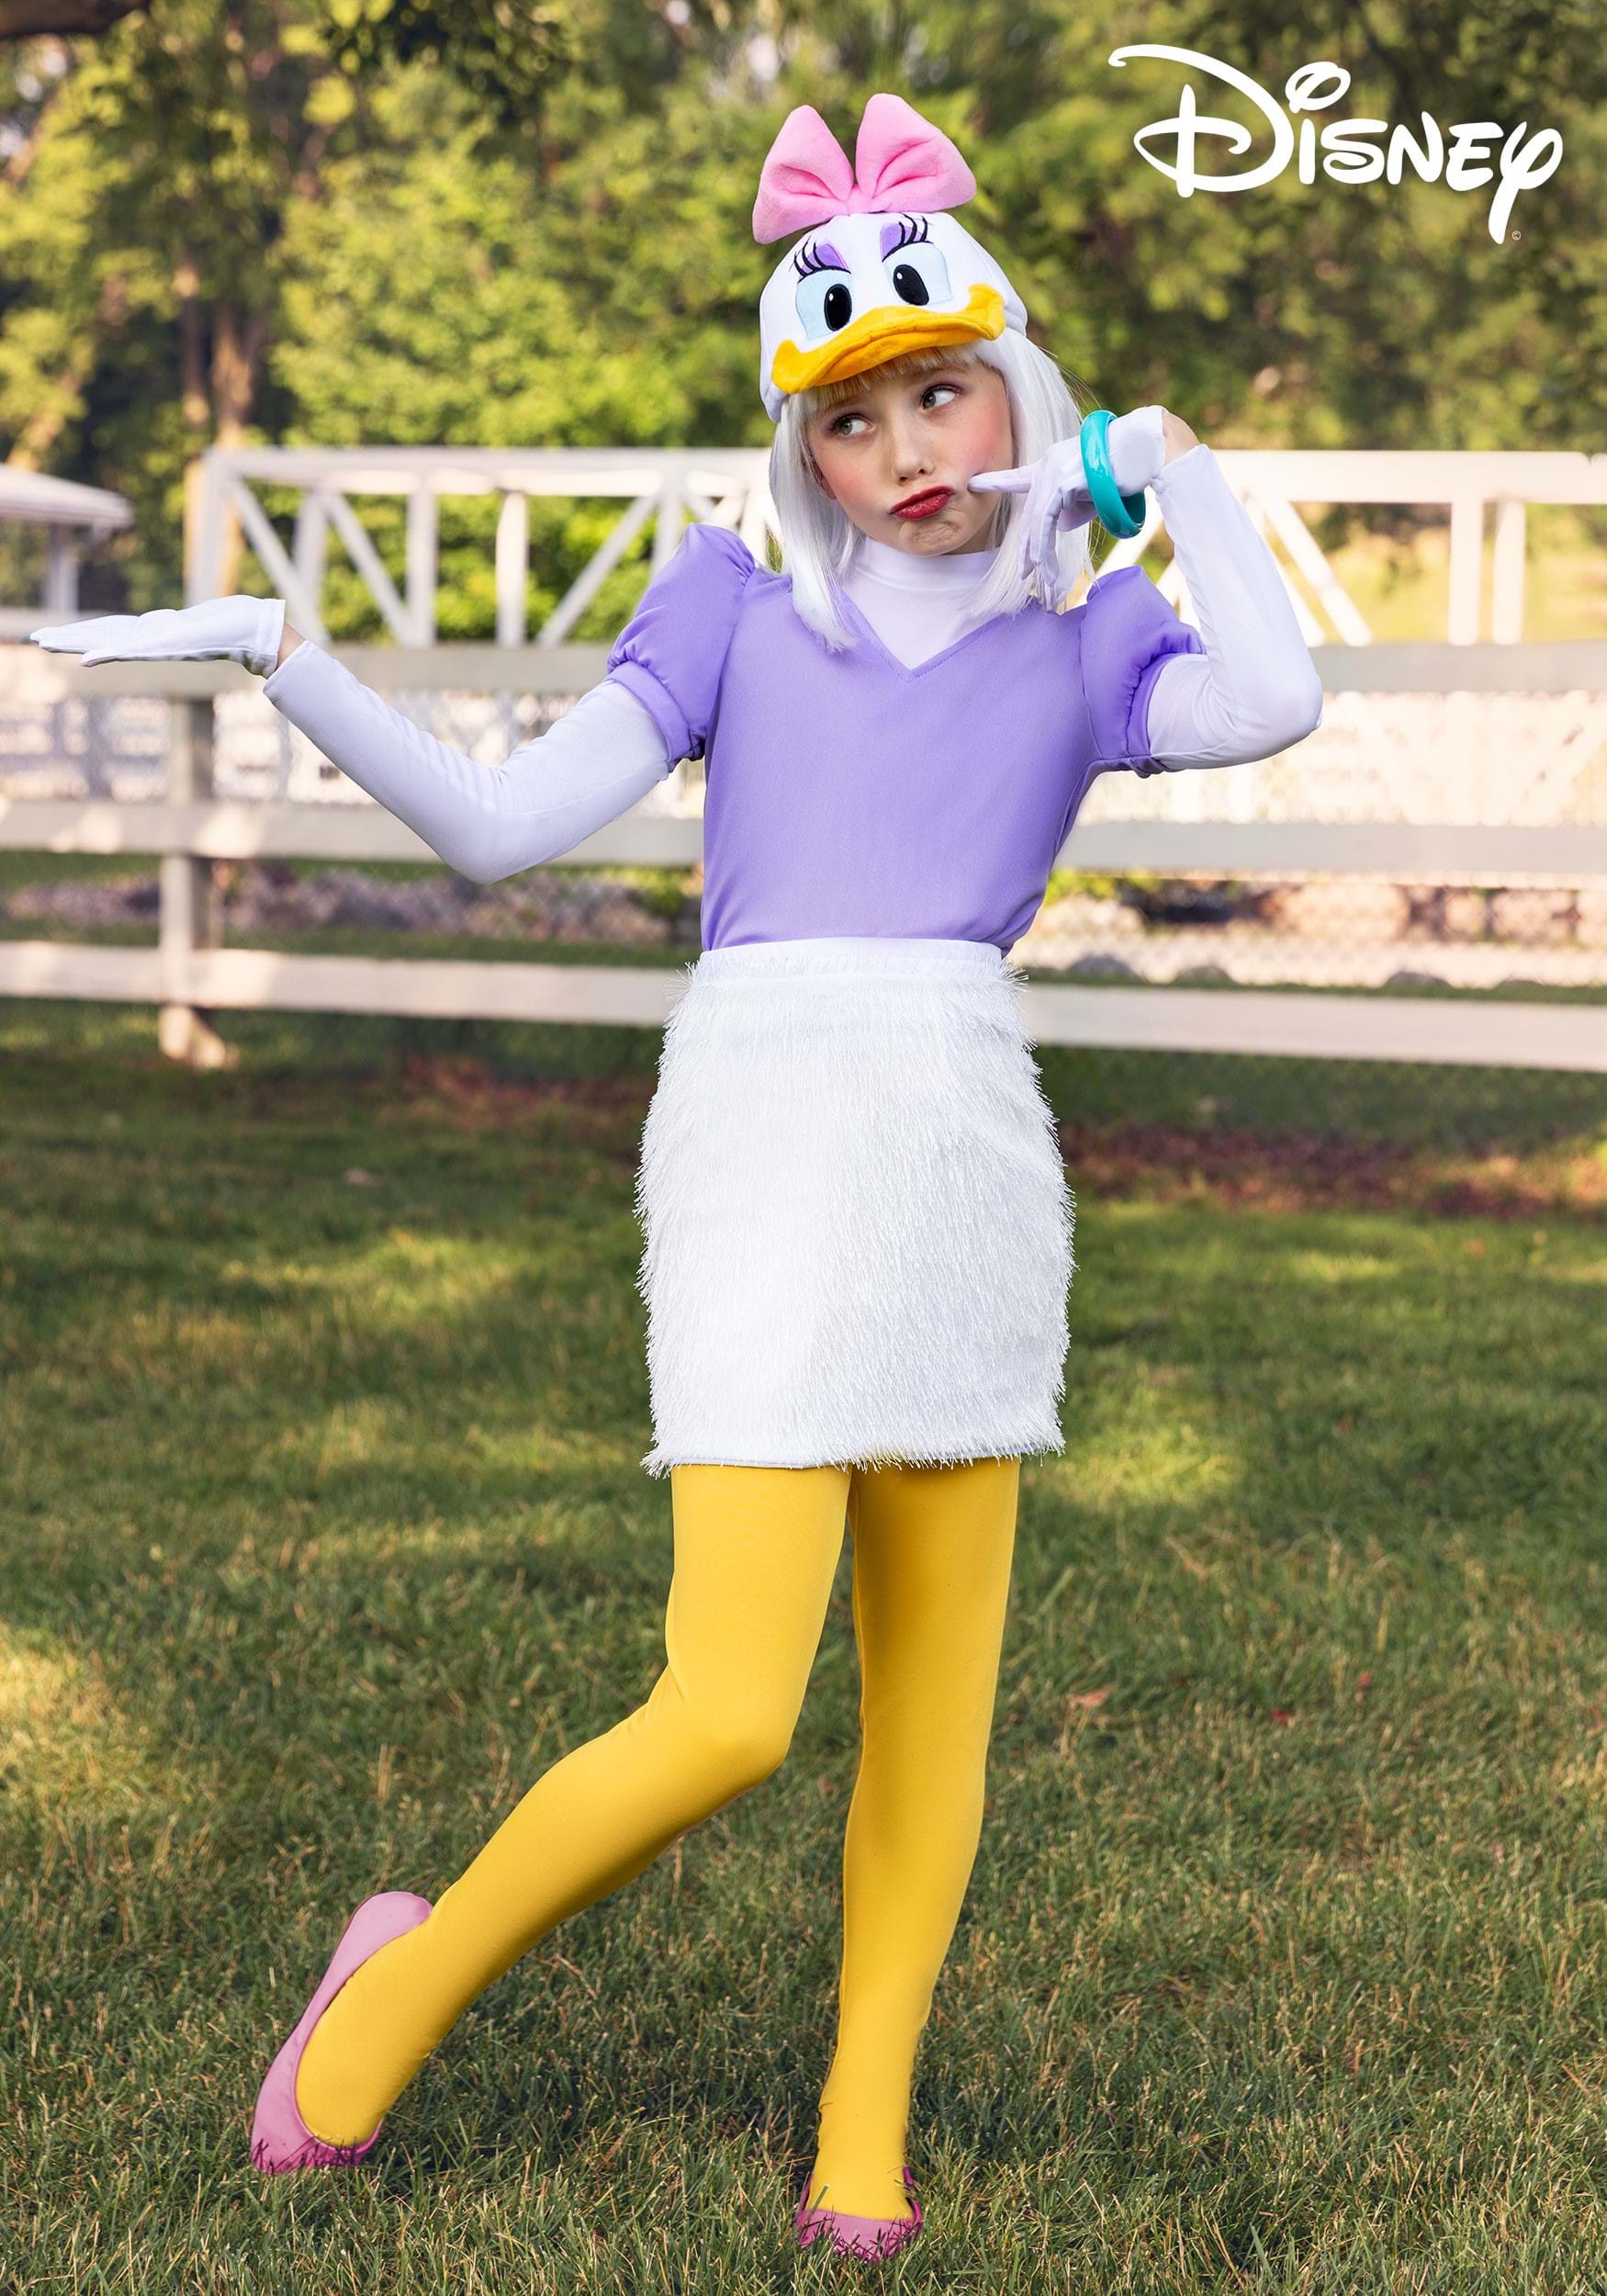 https://images.halloweencostumes.ca/products/75645/1-1/kids-daisy-duck-costume.jpg